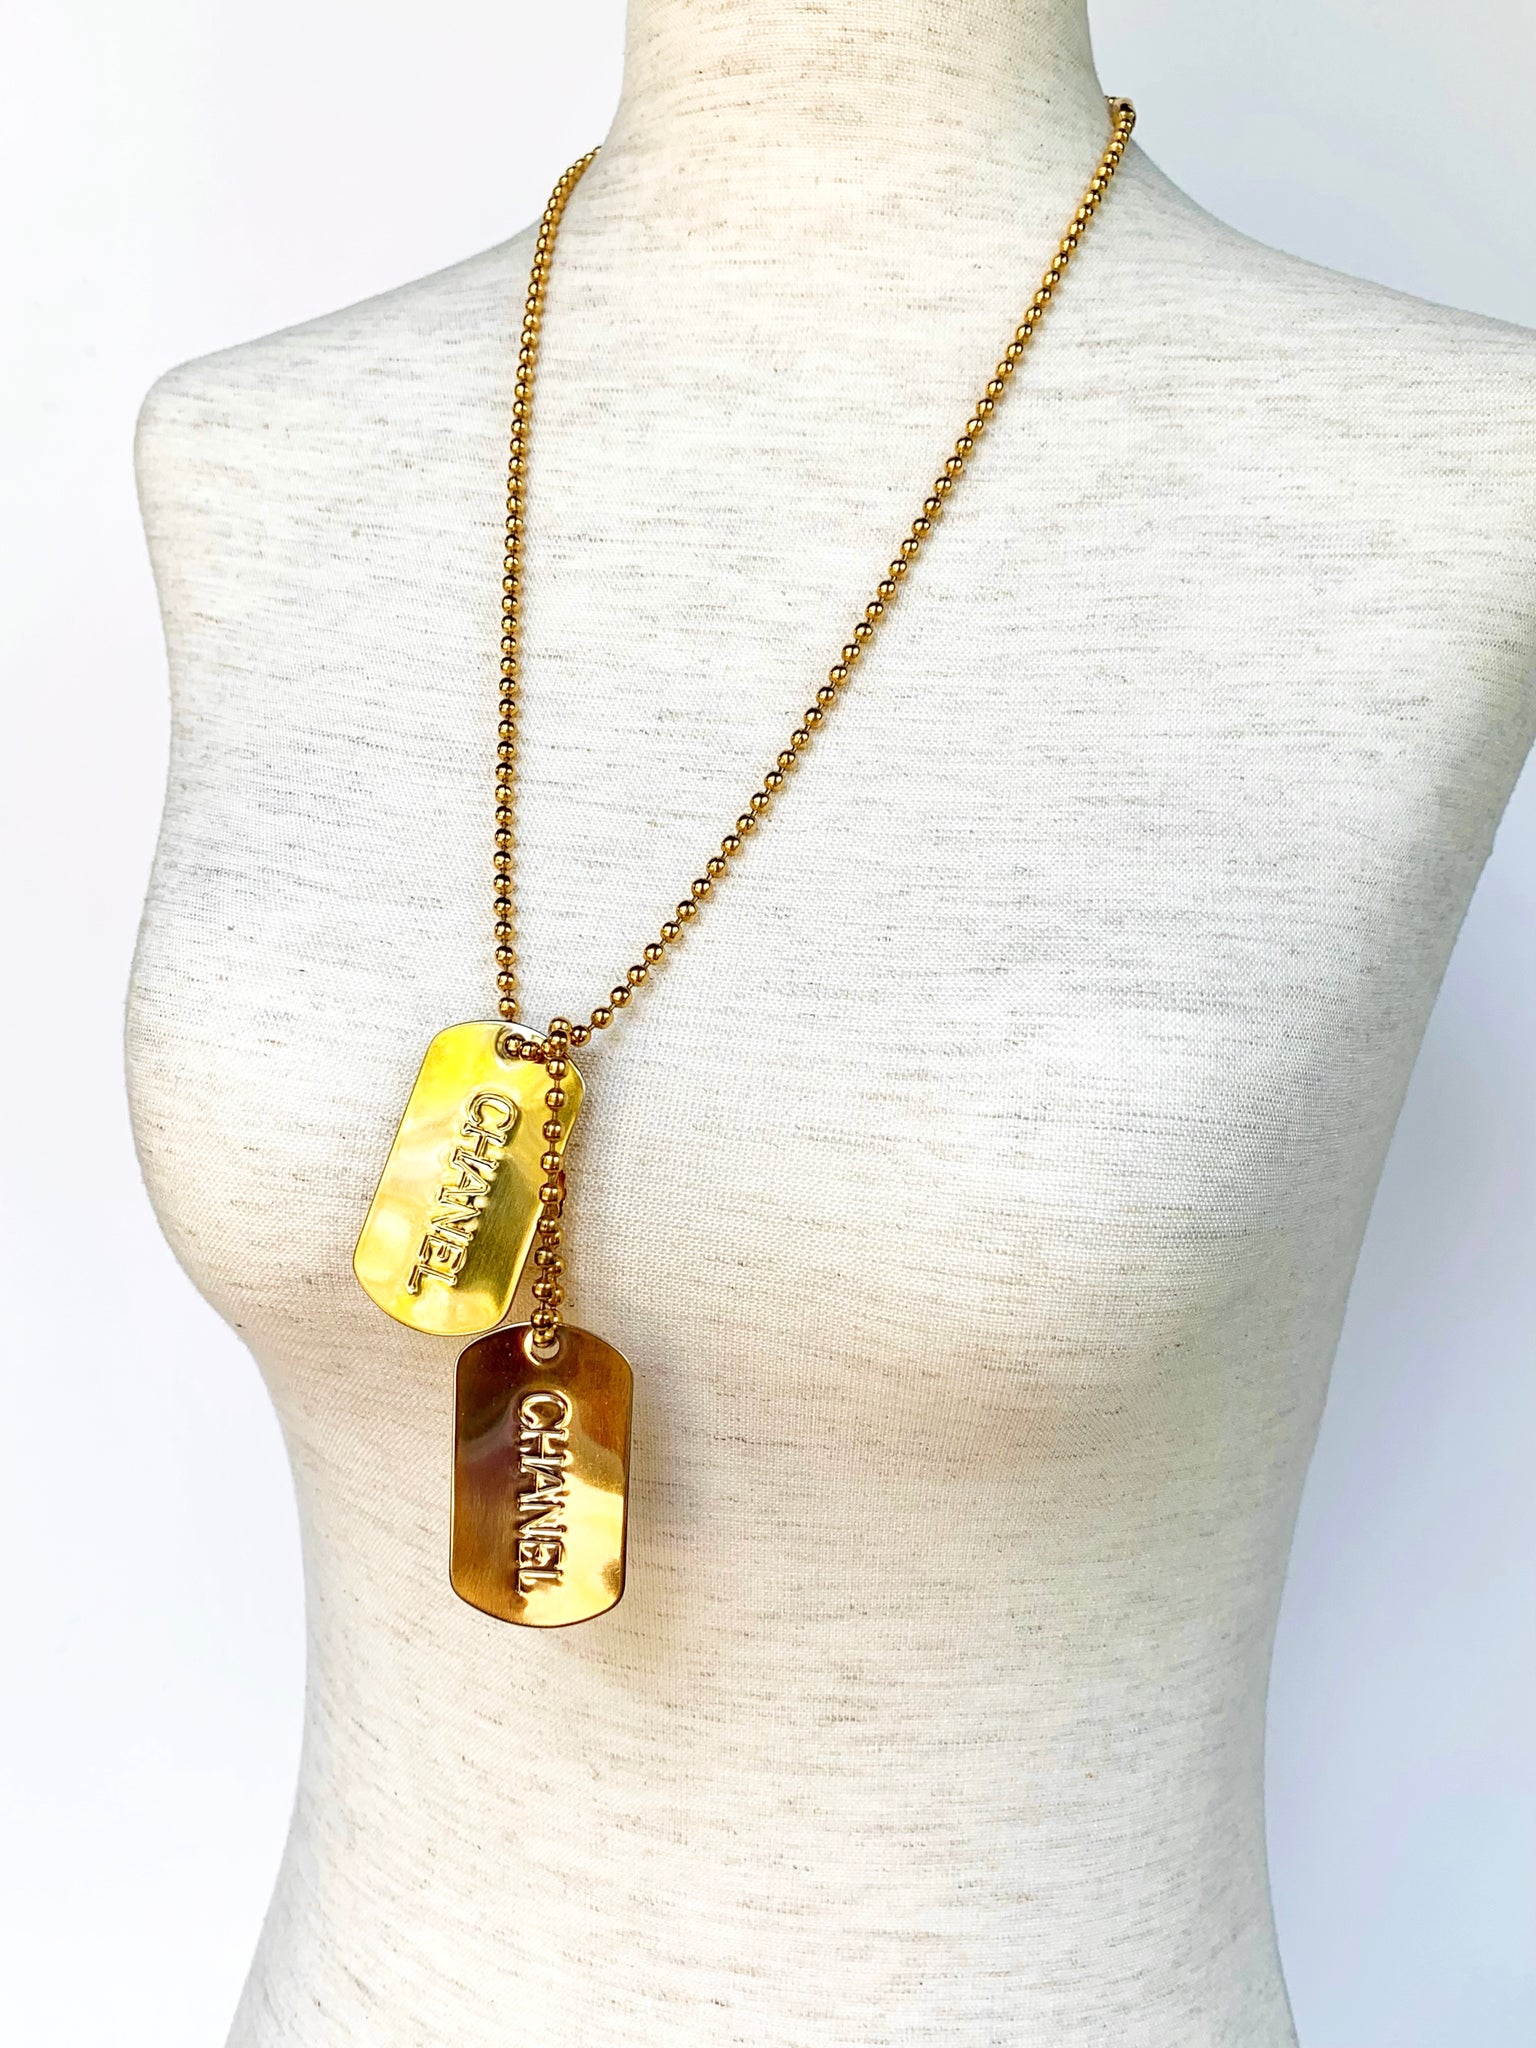 Gold Metal Dog Tag Necklace, 1993, Handbags & Accessories, The Chanel  Collection, 2022